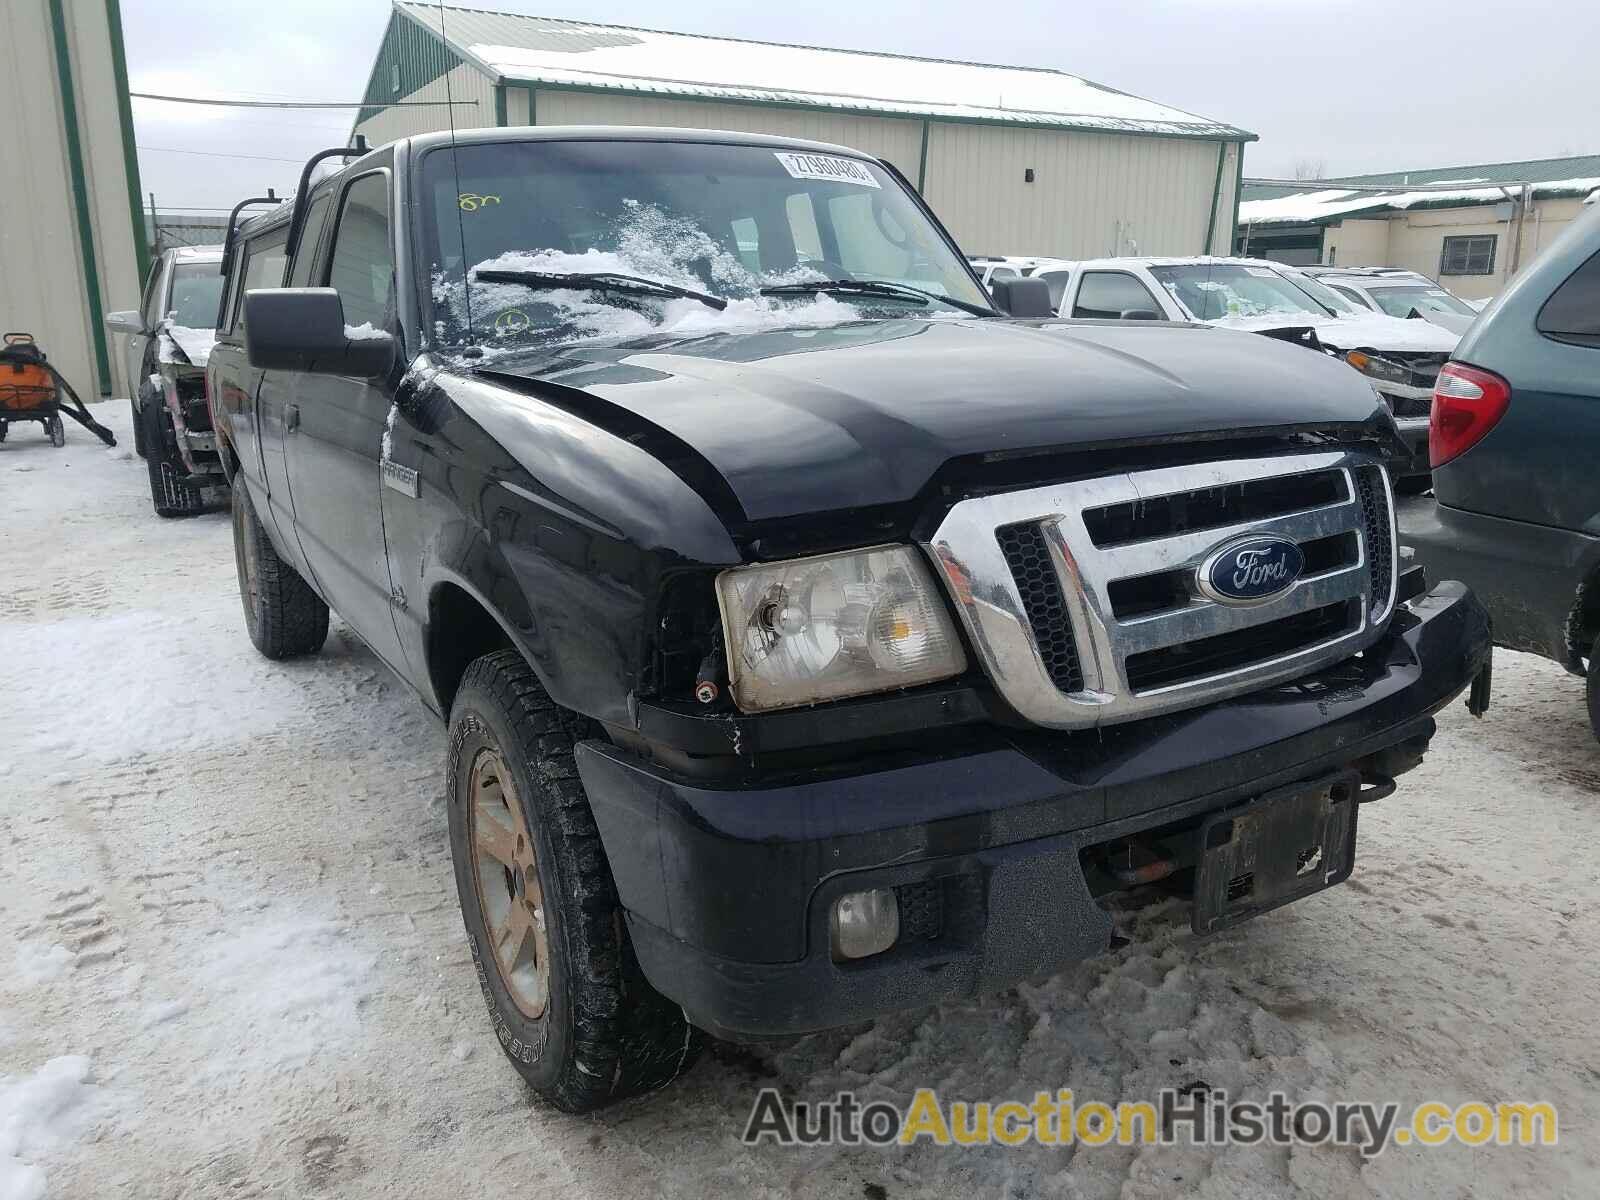 2006 FORD RANGER SUP SUPER CAB, 1FTZR15EX6PA14866